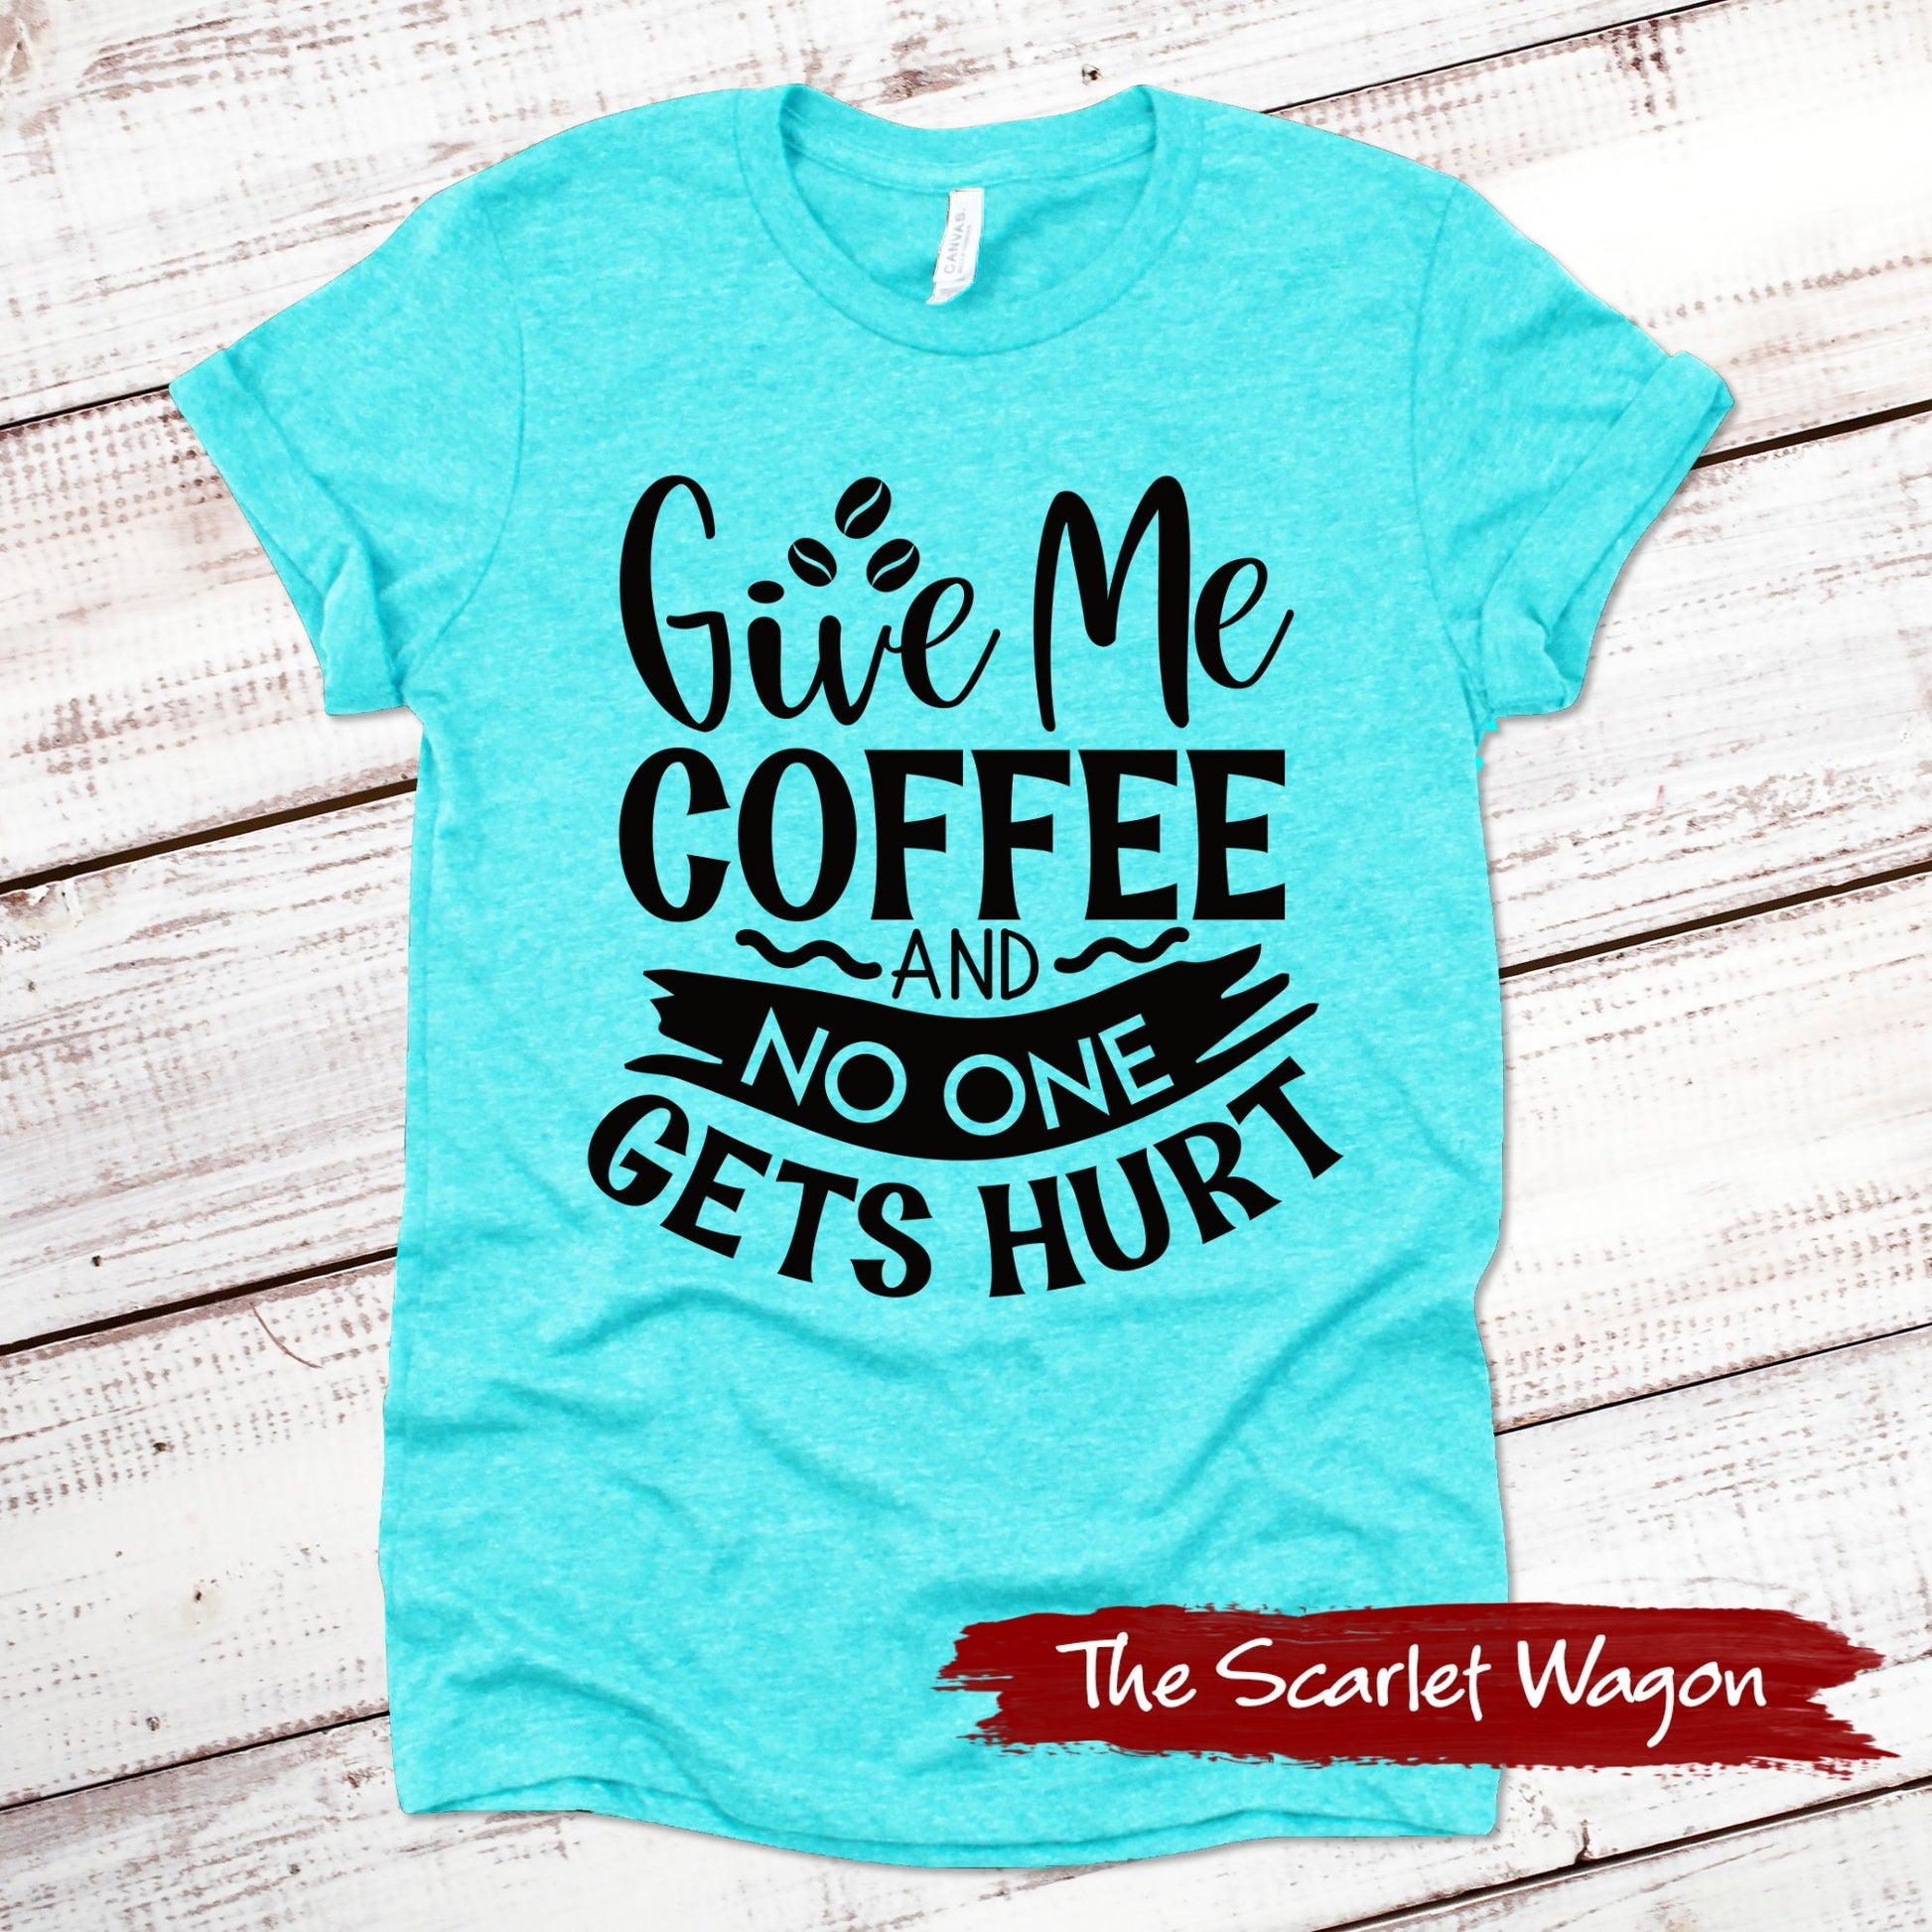 Give Me Coffee and No One Gets Hurt Funny Shirt Scarlet Wagon Heather Teal XS 